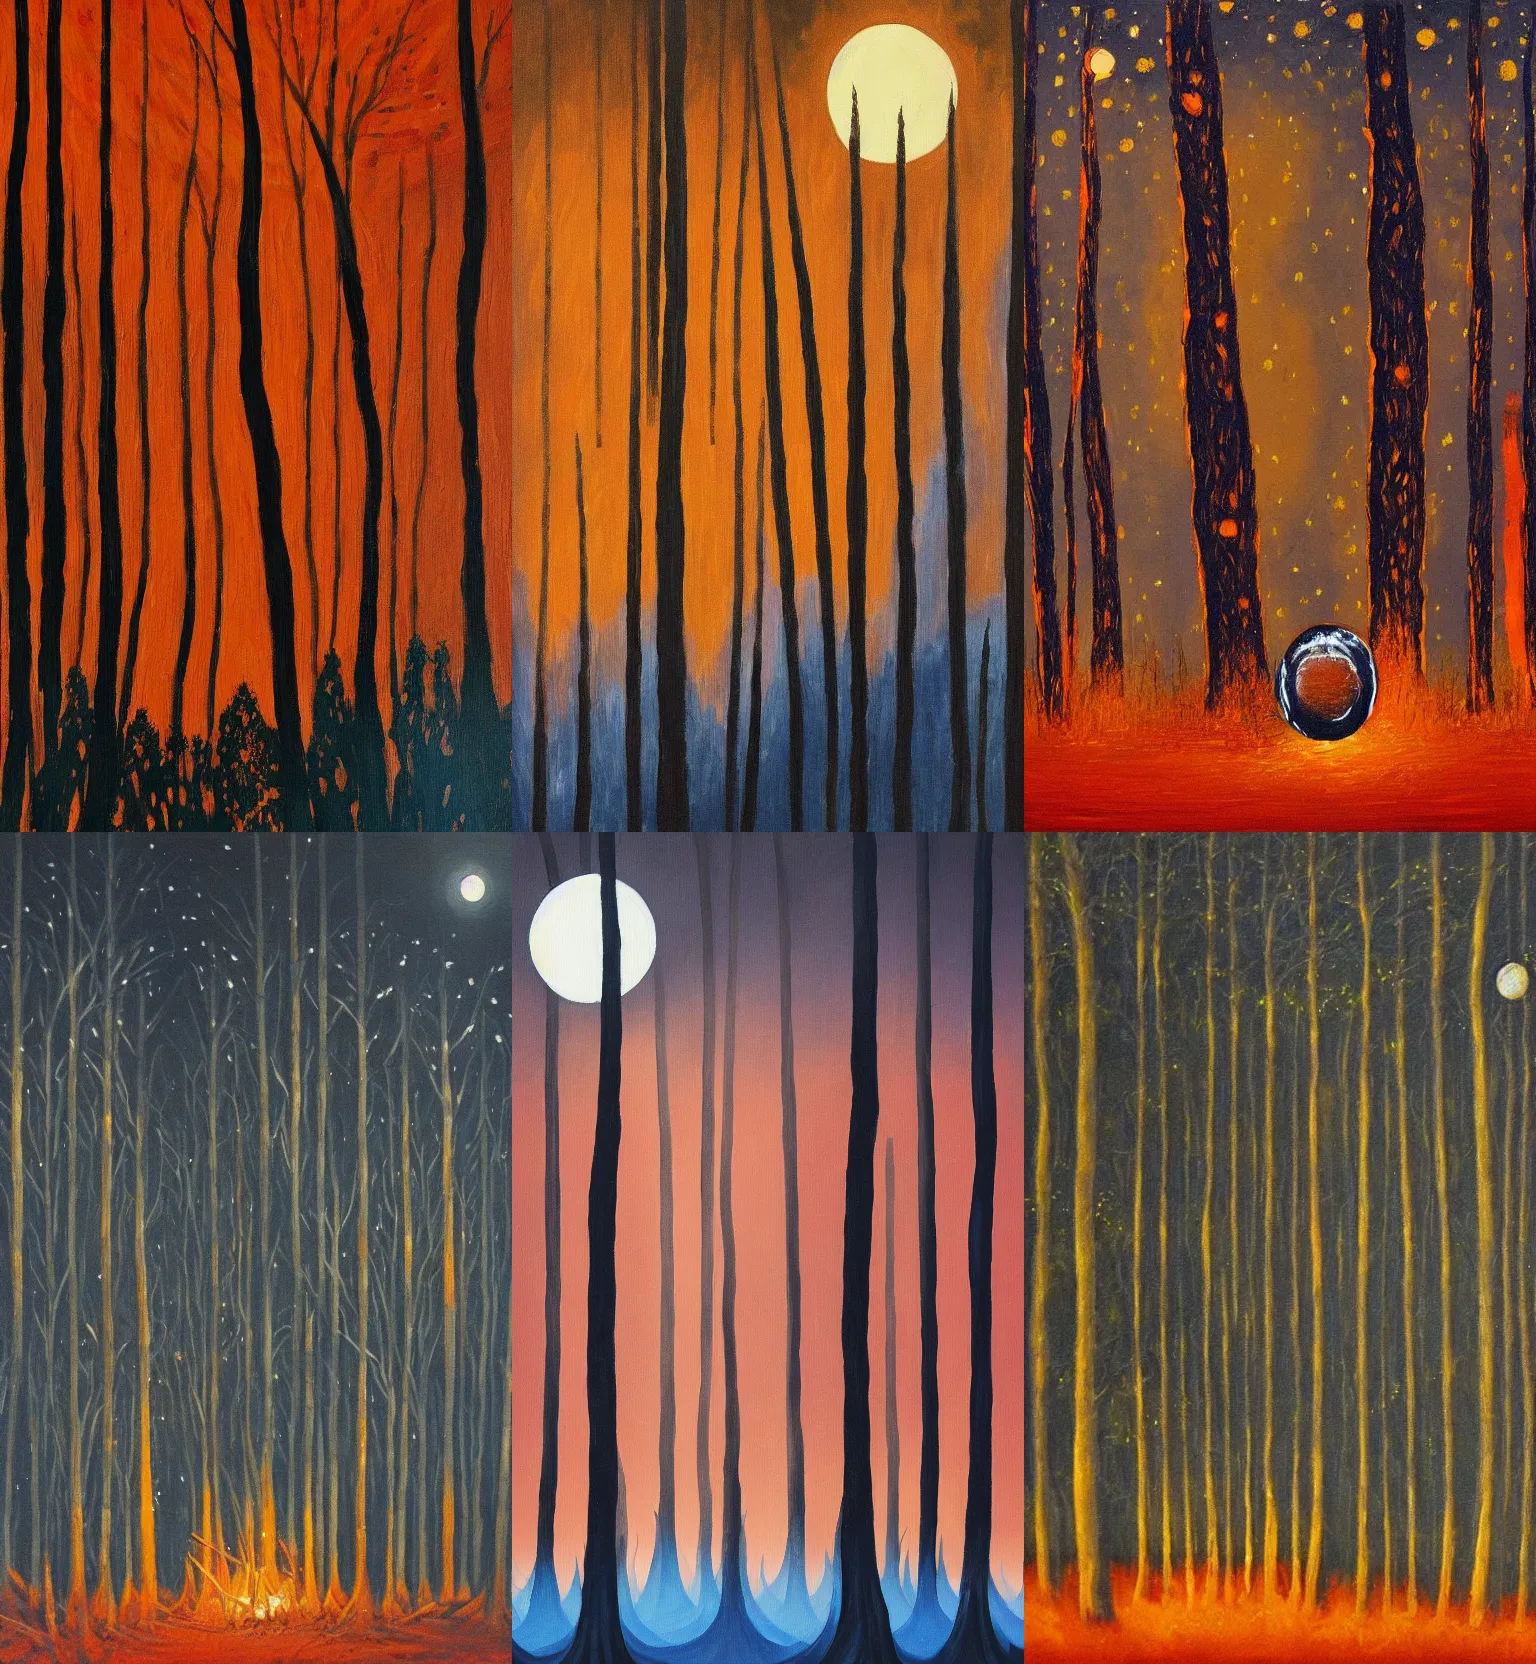 Prompt: a painting of a moonlit forest at night with a bonfire, there's a man in a suit near the fire with hid back turned away from the viewer, the top of the trees have morphed into a worm's eye view of art deco skyscrapers surrounding the moon, the painting has cold blues at the top and warm orange colors at the bottom